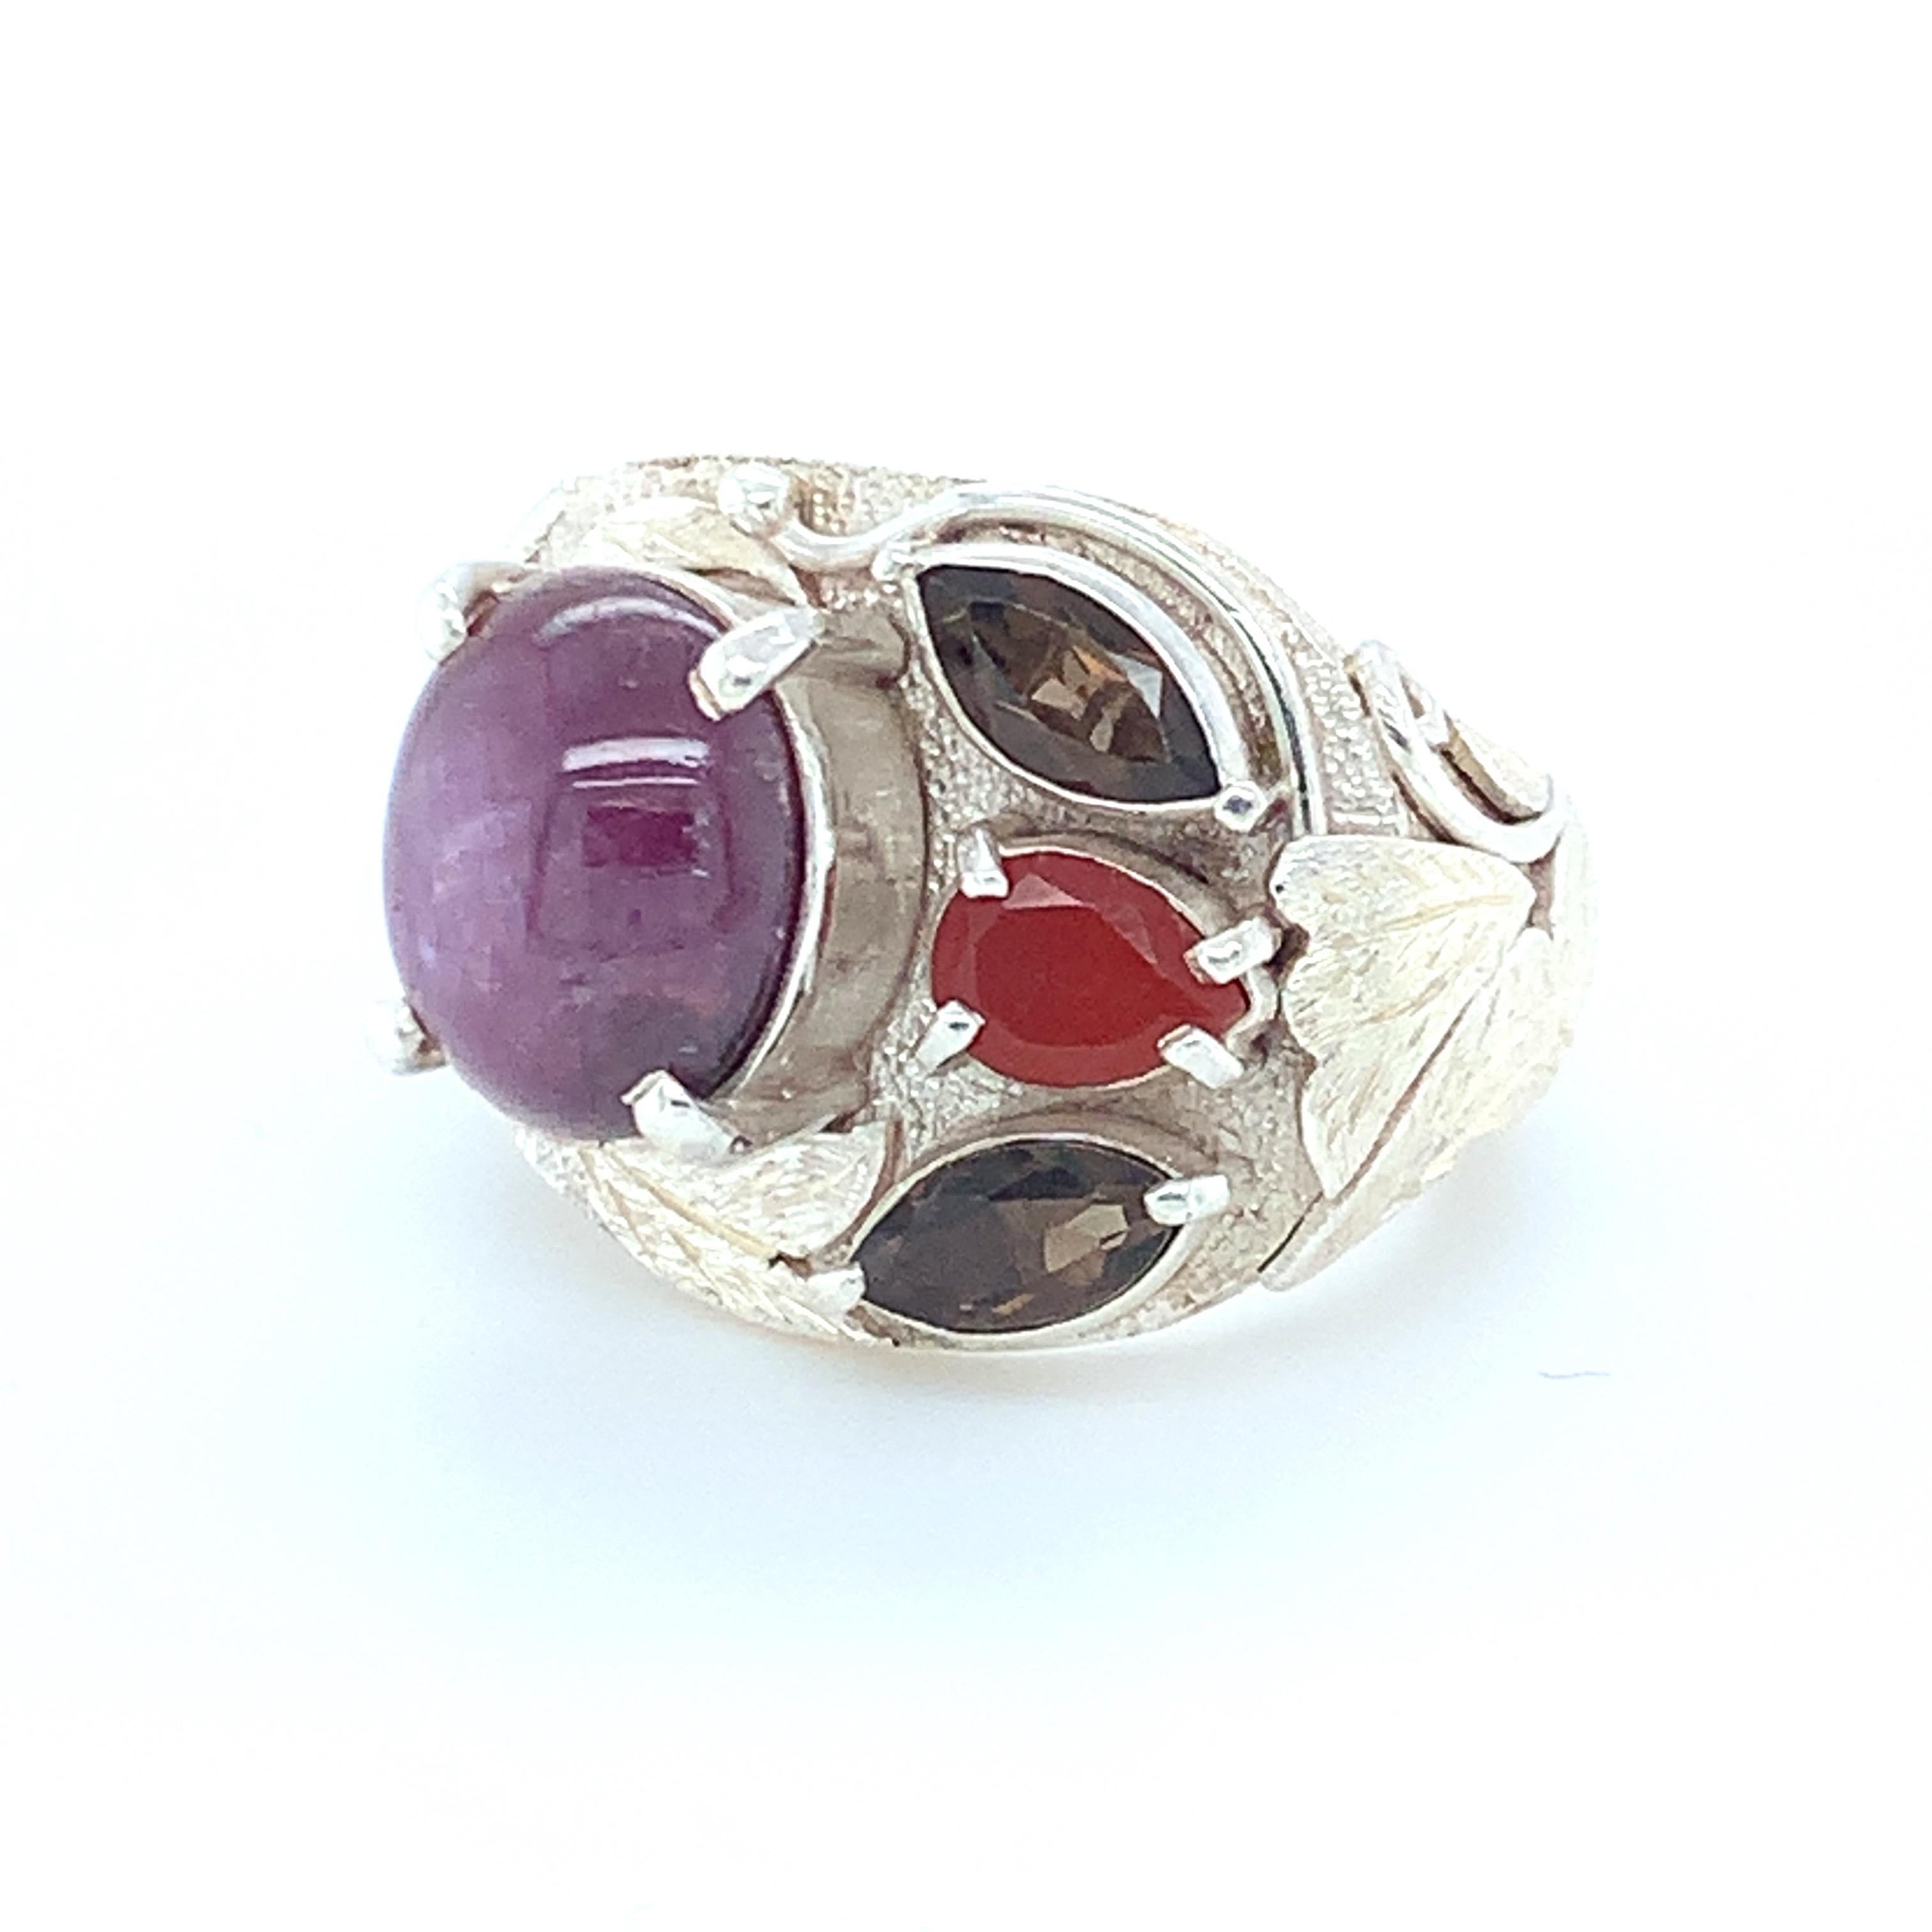 Round cabochon cut star ruby is the main stone along with smoky topaz and orange onyx which are set in asymmetric design. Multi-layer work on the sides enhances the beauty of this ring. Set in sterling silver and carefully crafted with hand makes it